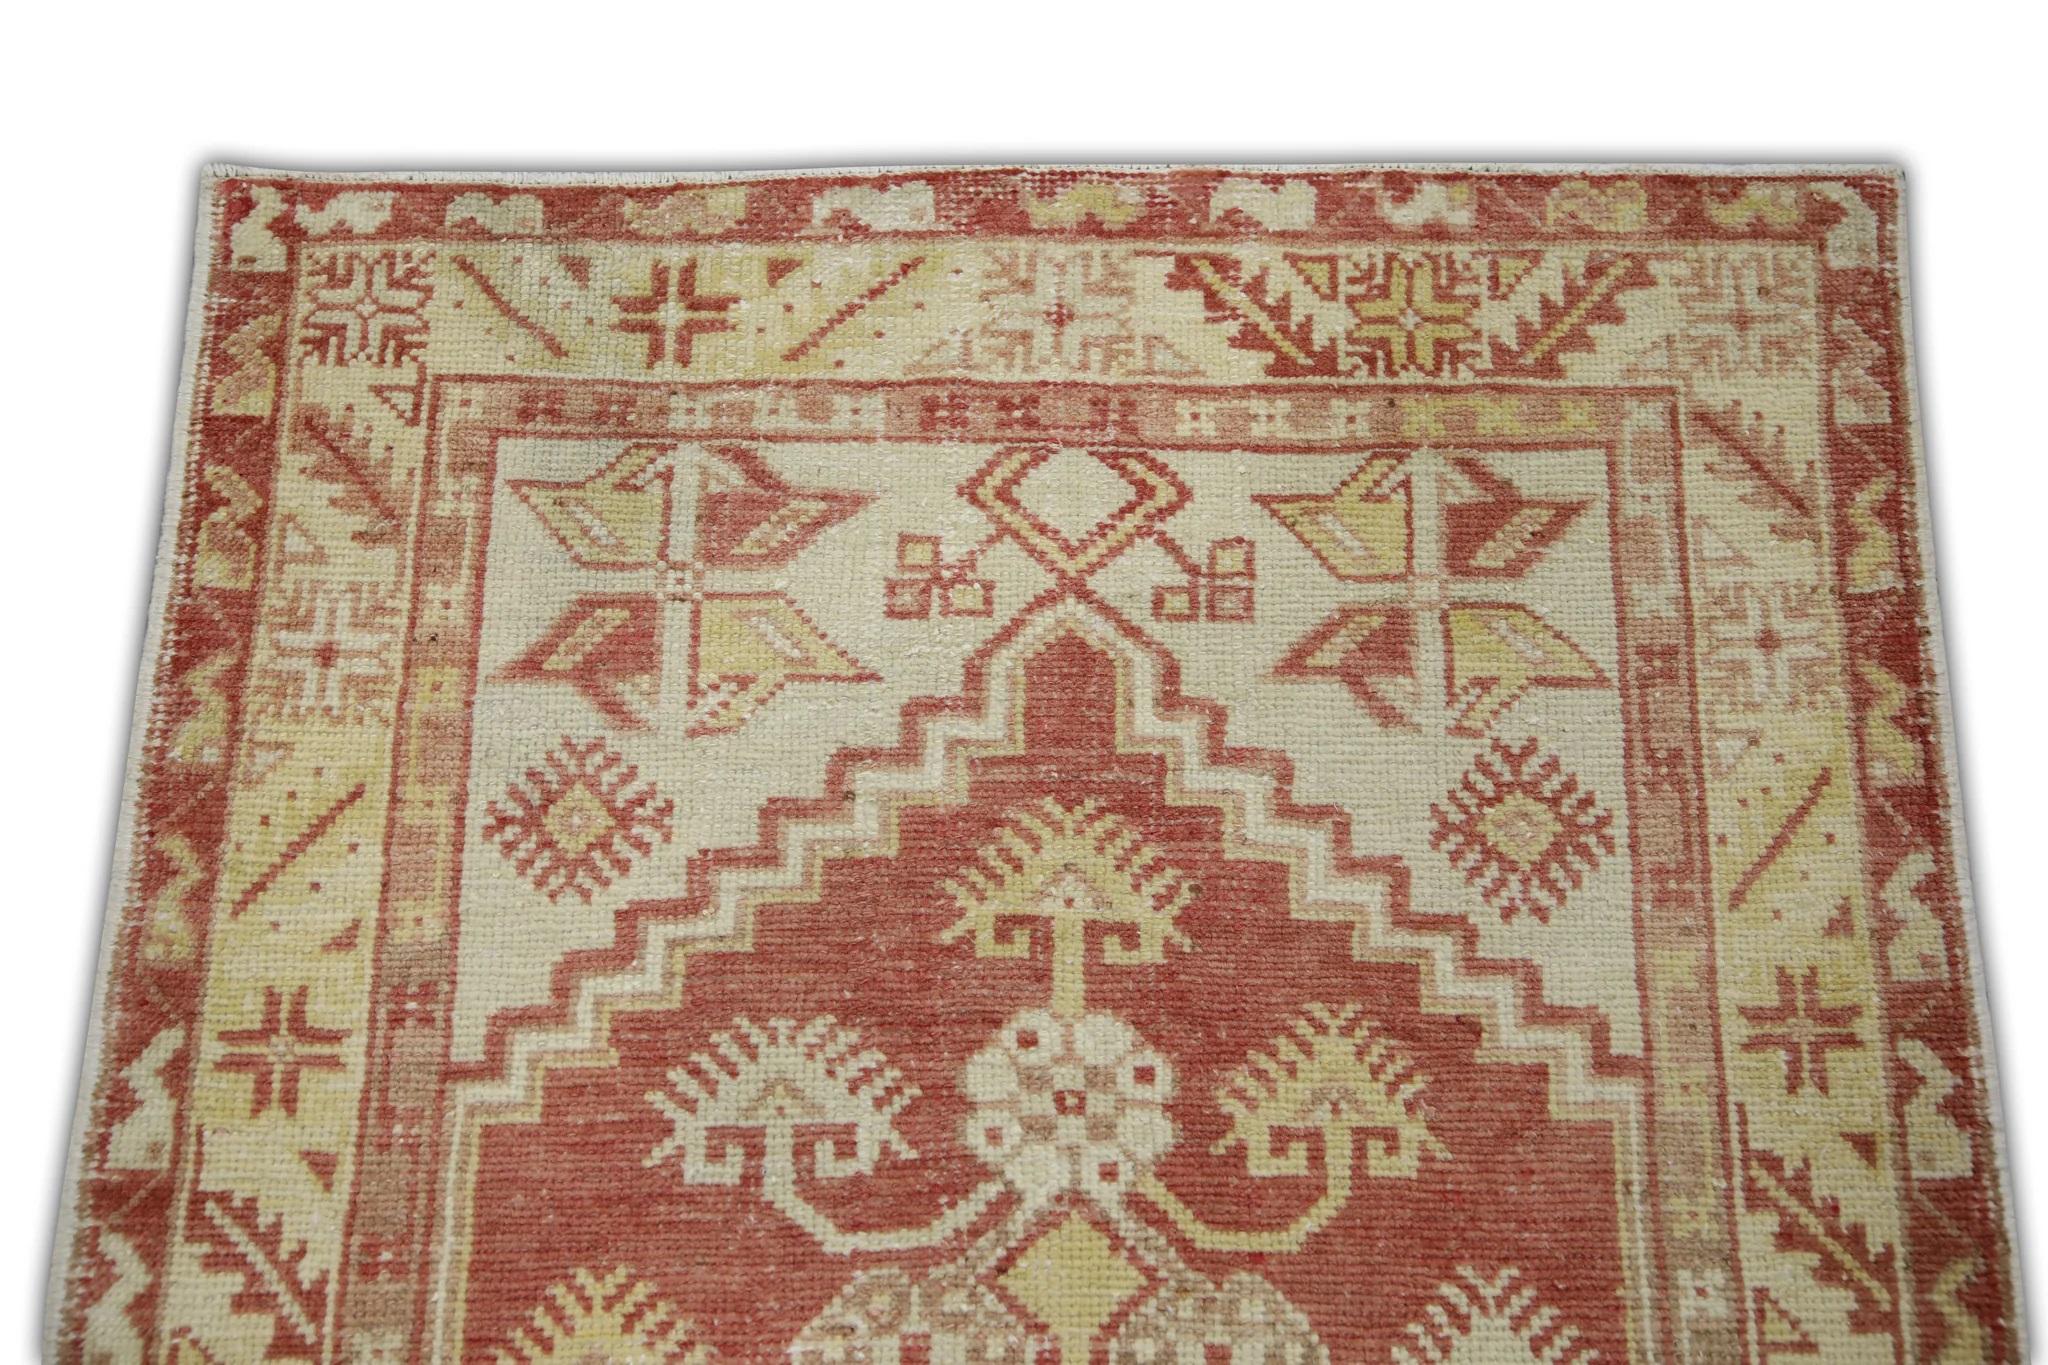 Hand-Woven 1960s Red & Yellow Vintage Turkish Rug 2'7